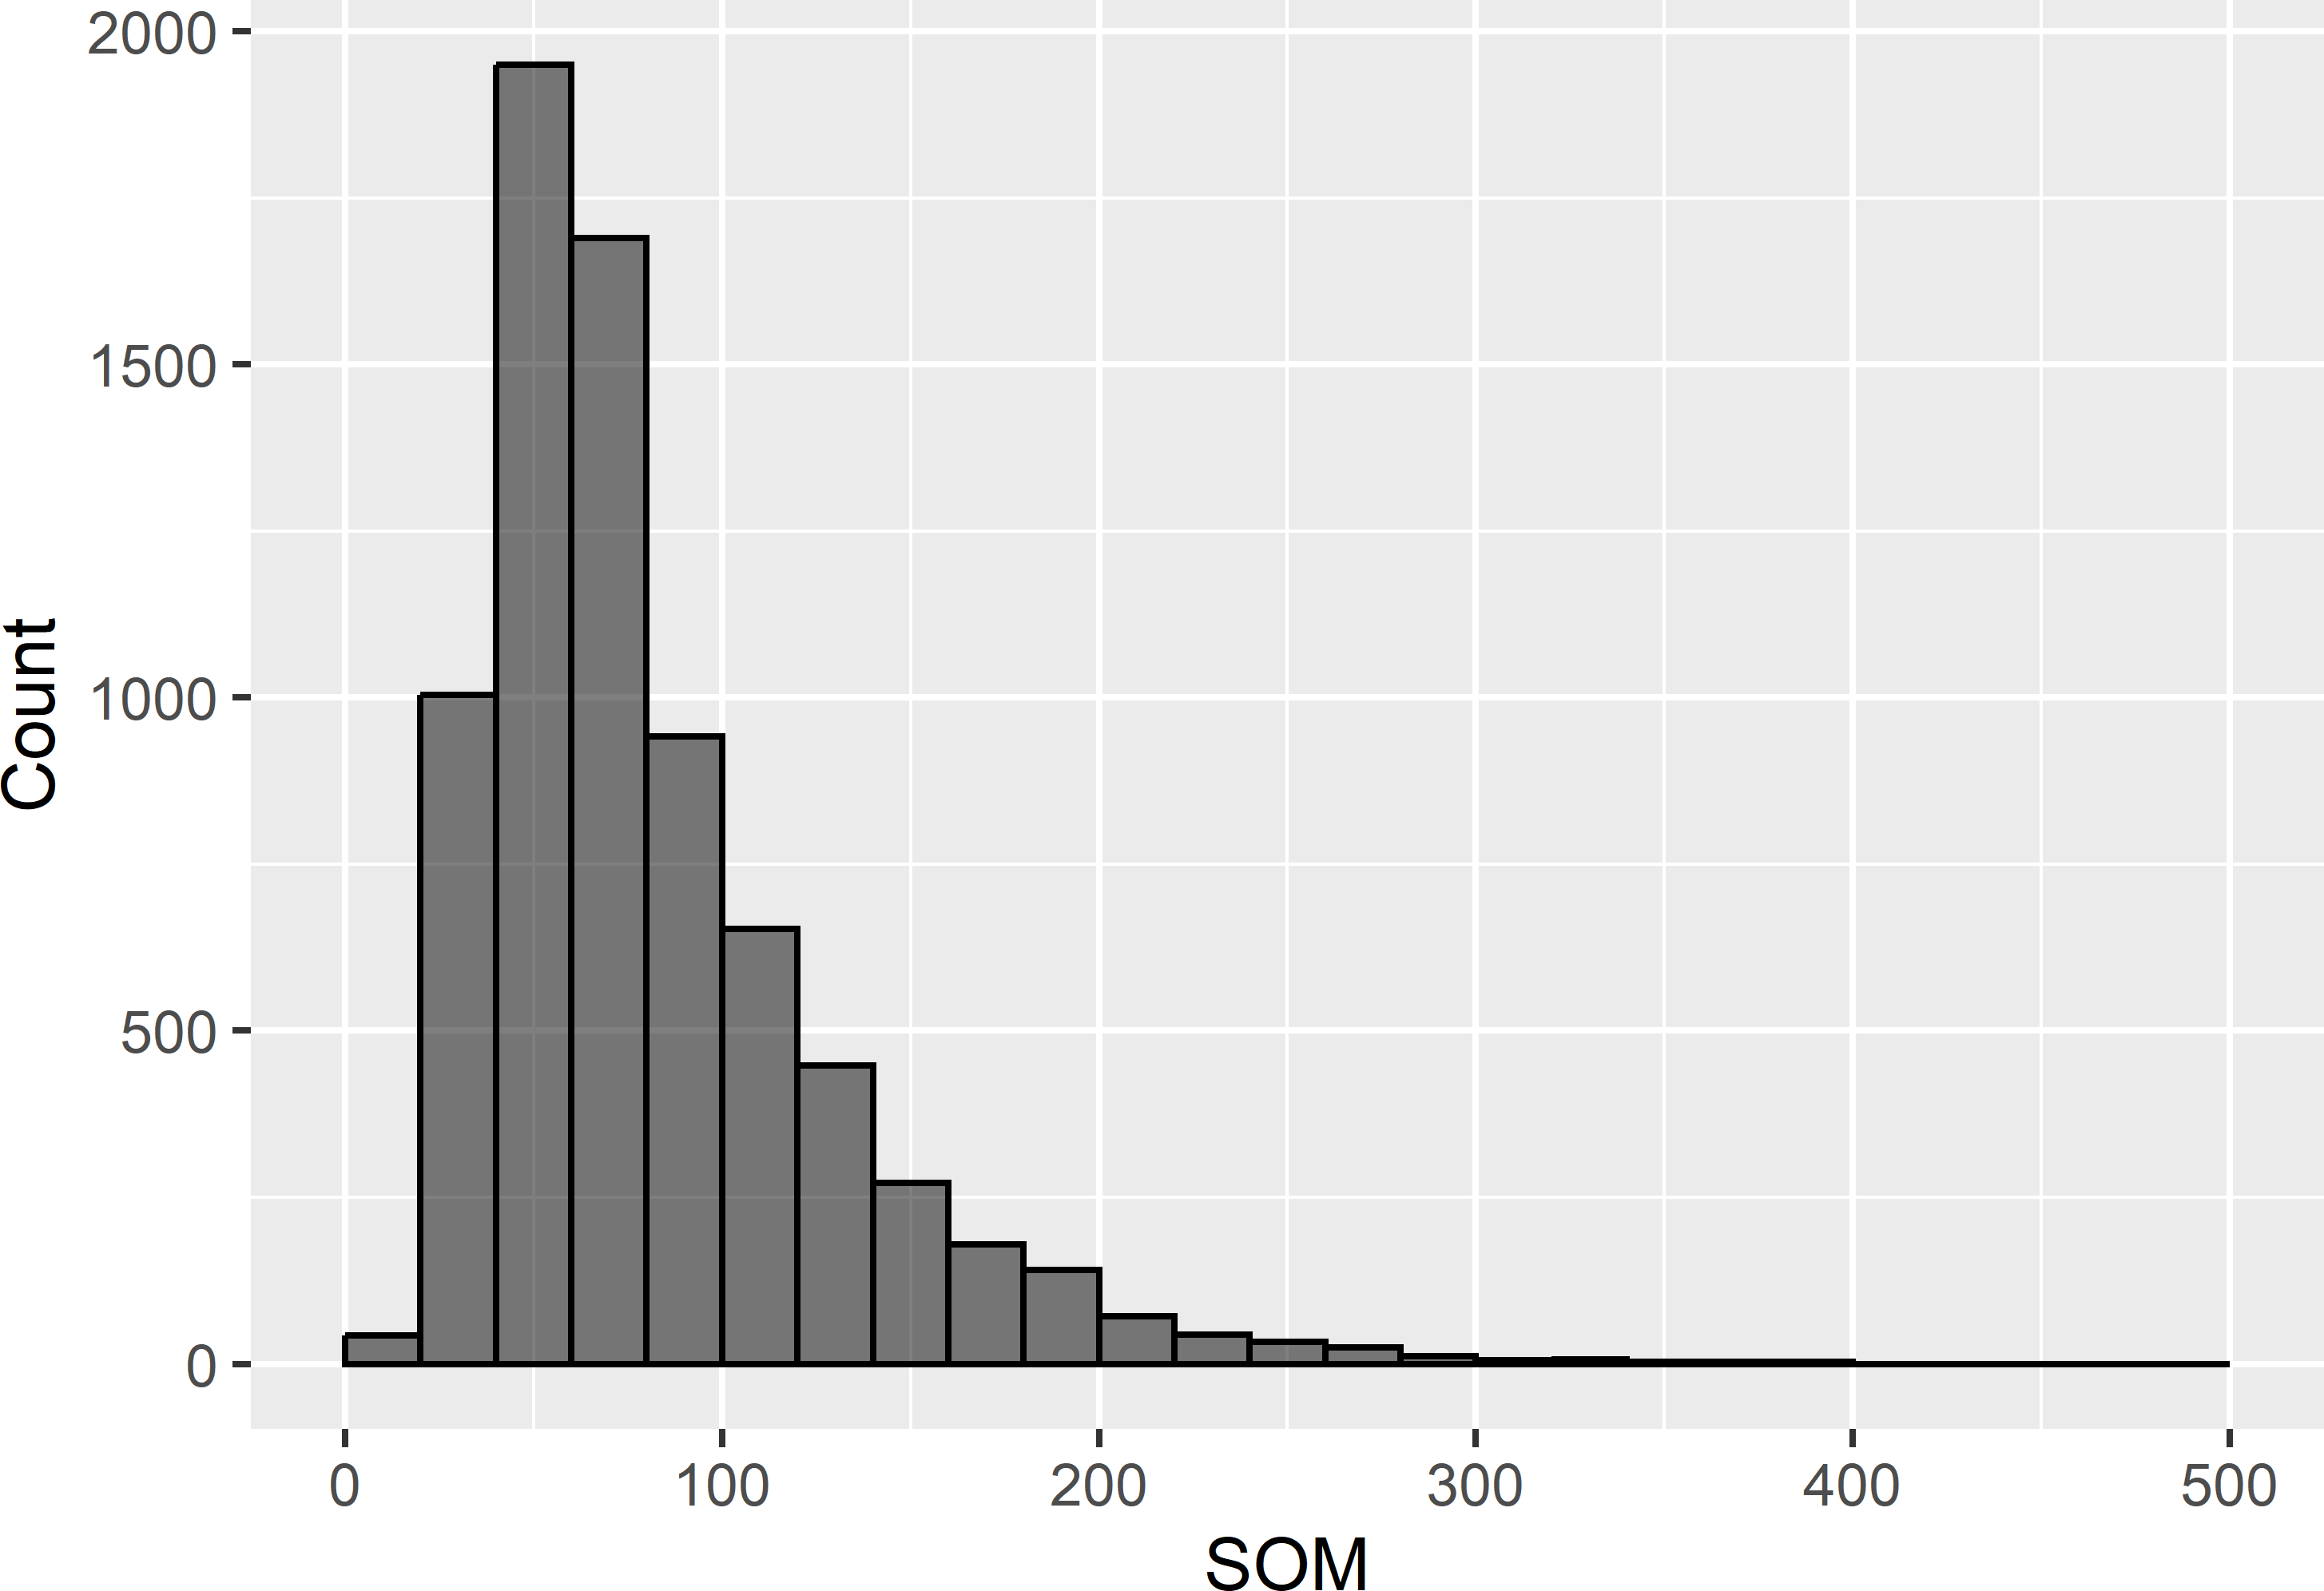 Frequency distribution of the simulated SOM concentration (g kg-1) in Voorst.